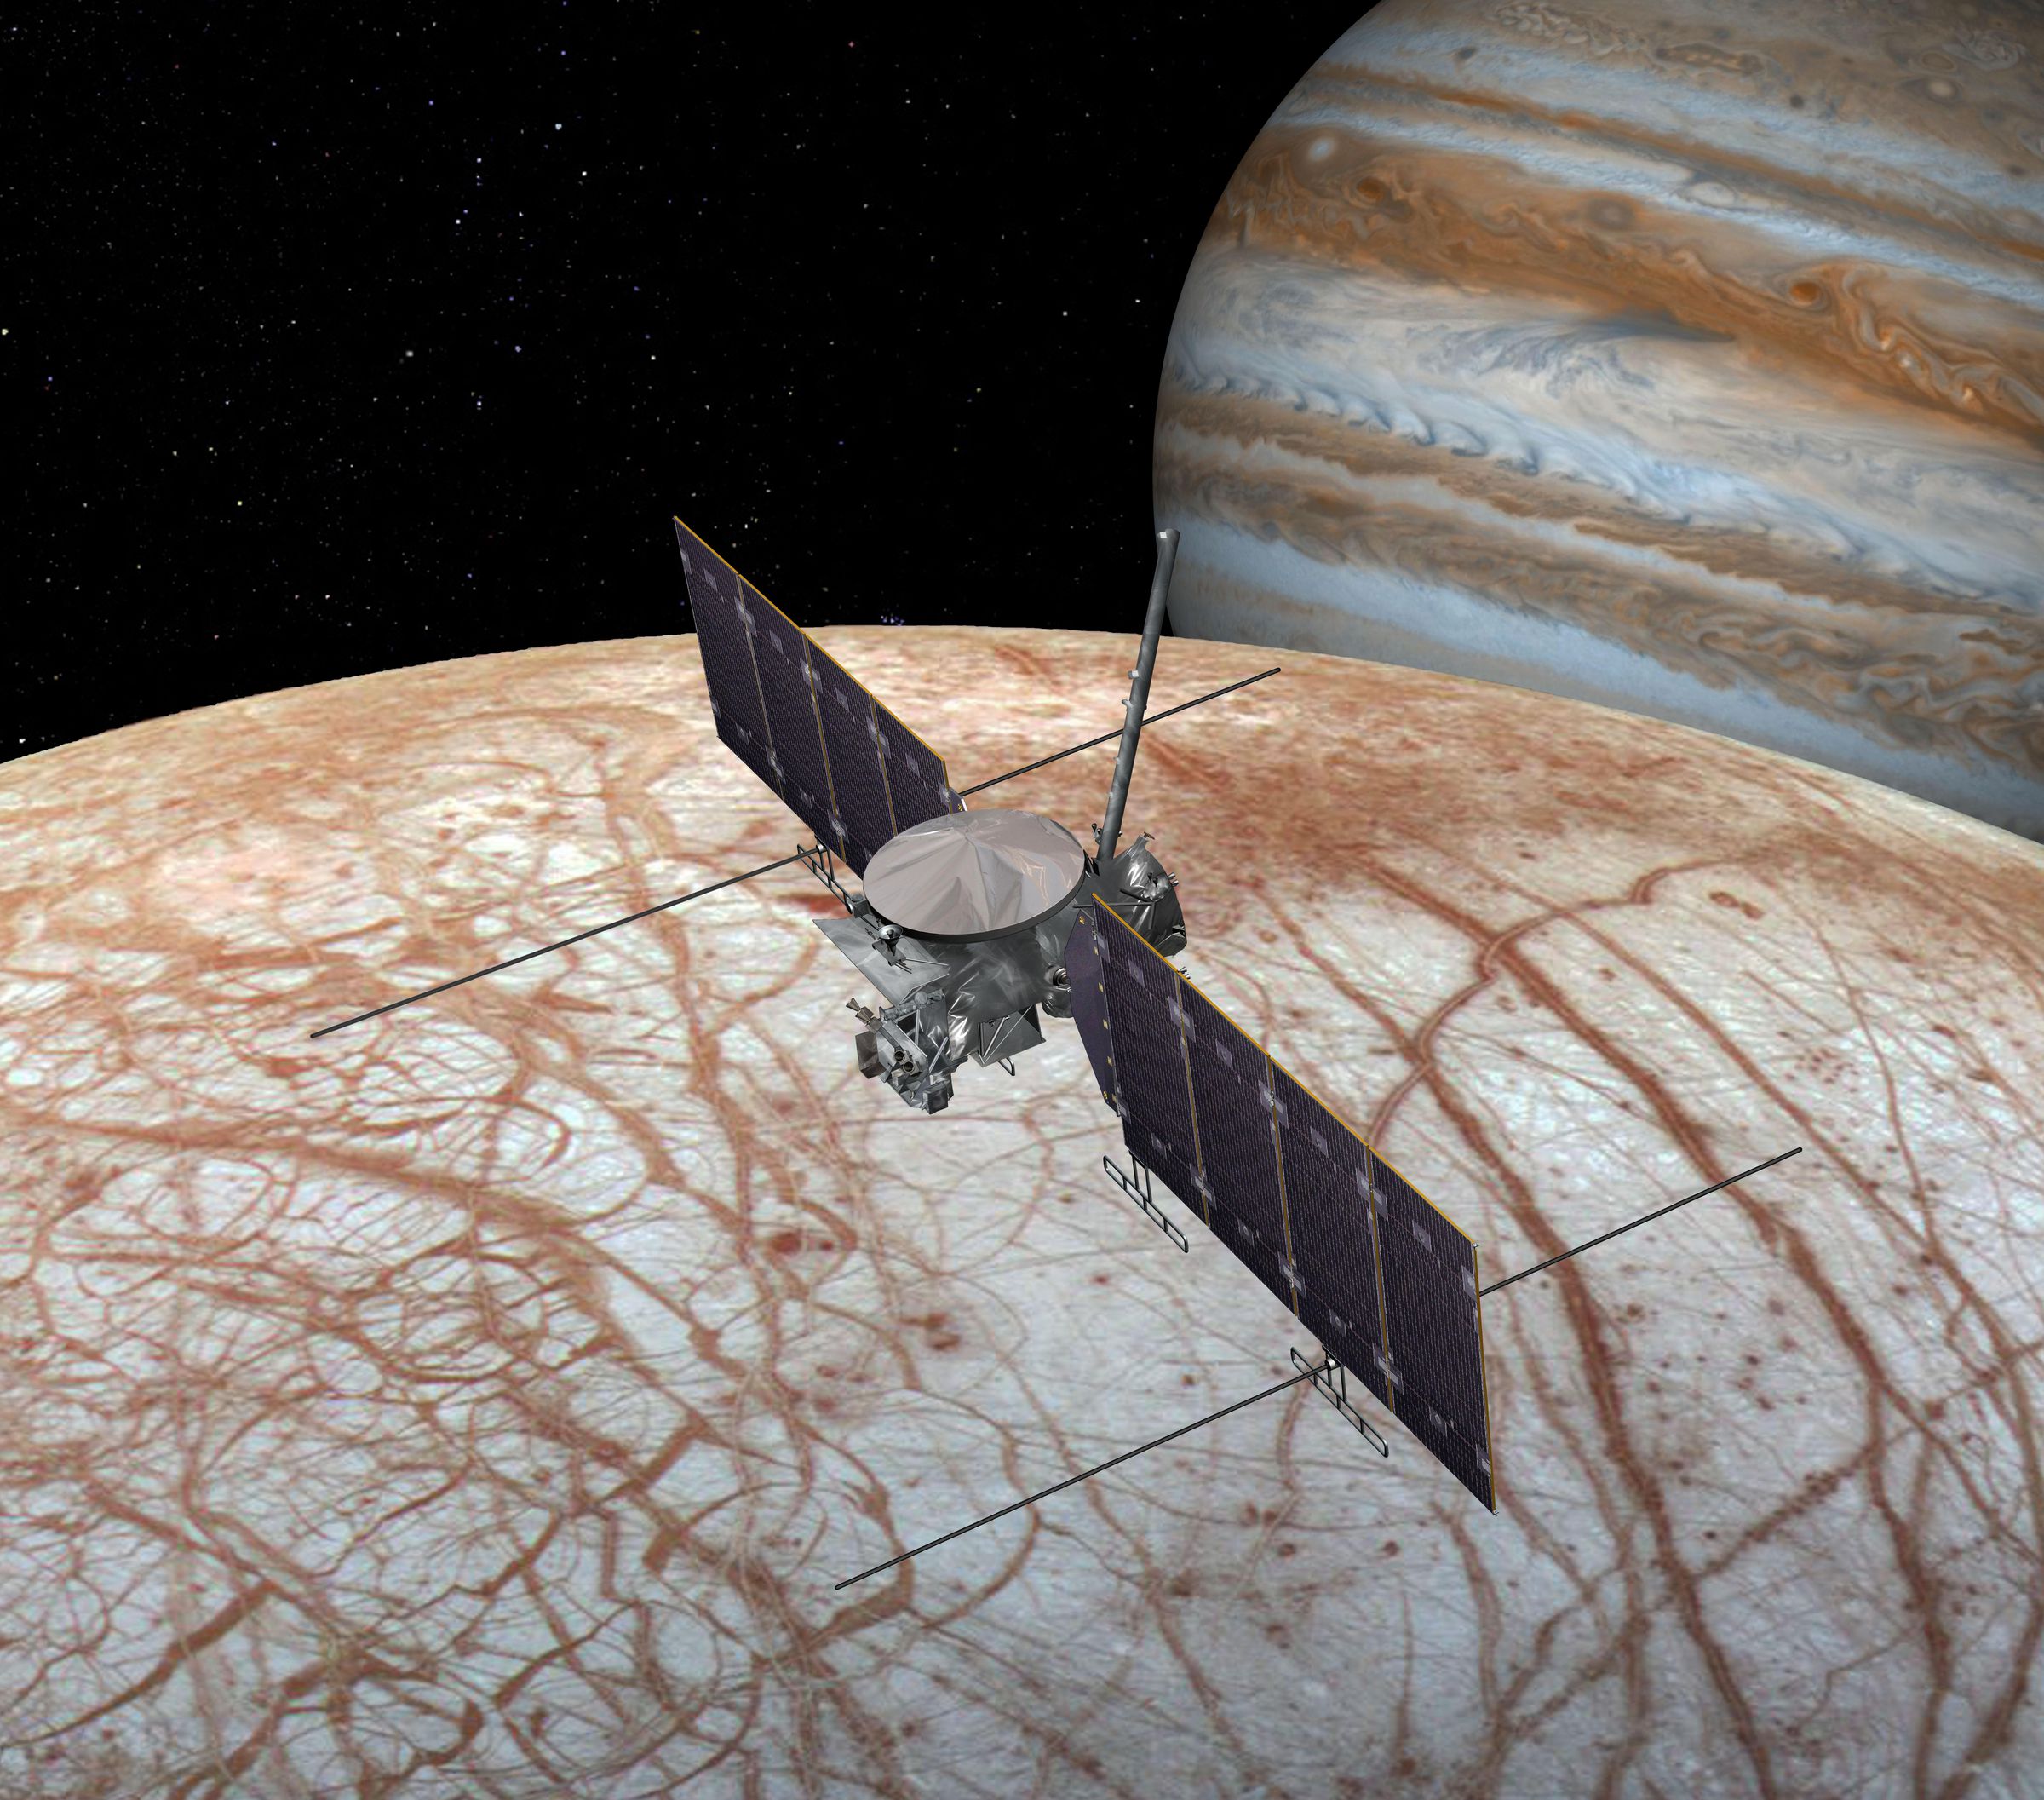 An artistic rendering of what the Europa Clipper spacecraft might look like